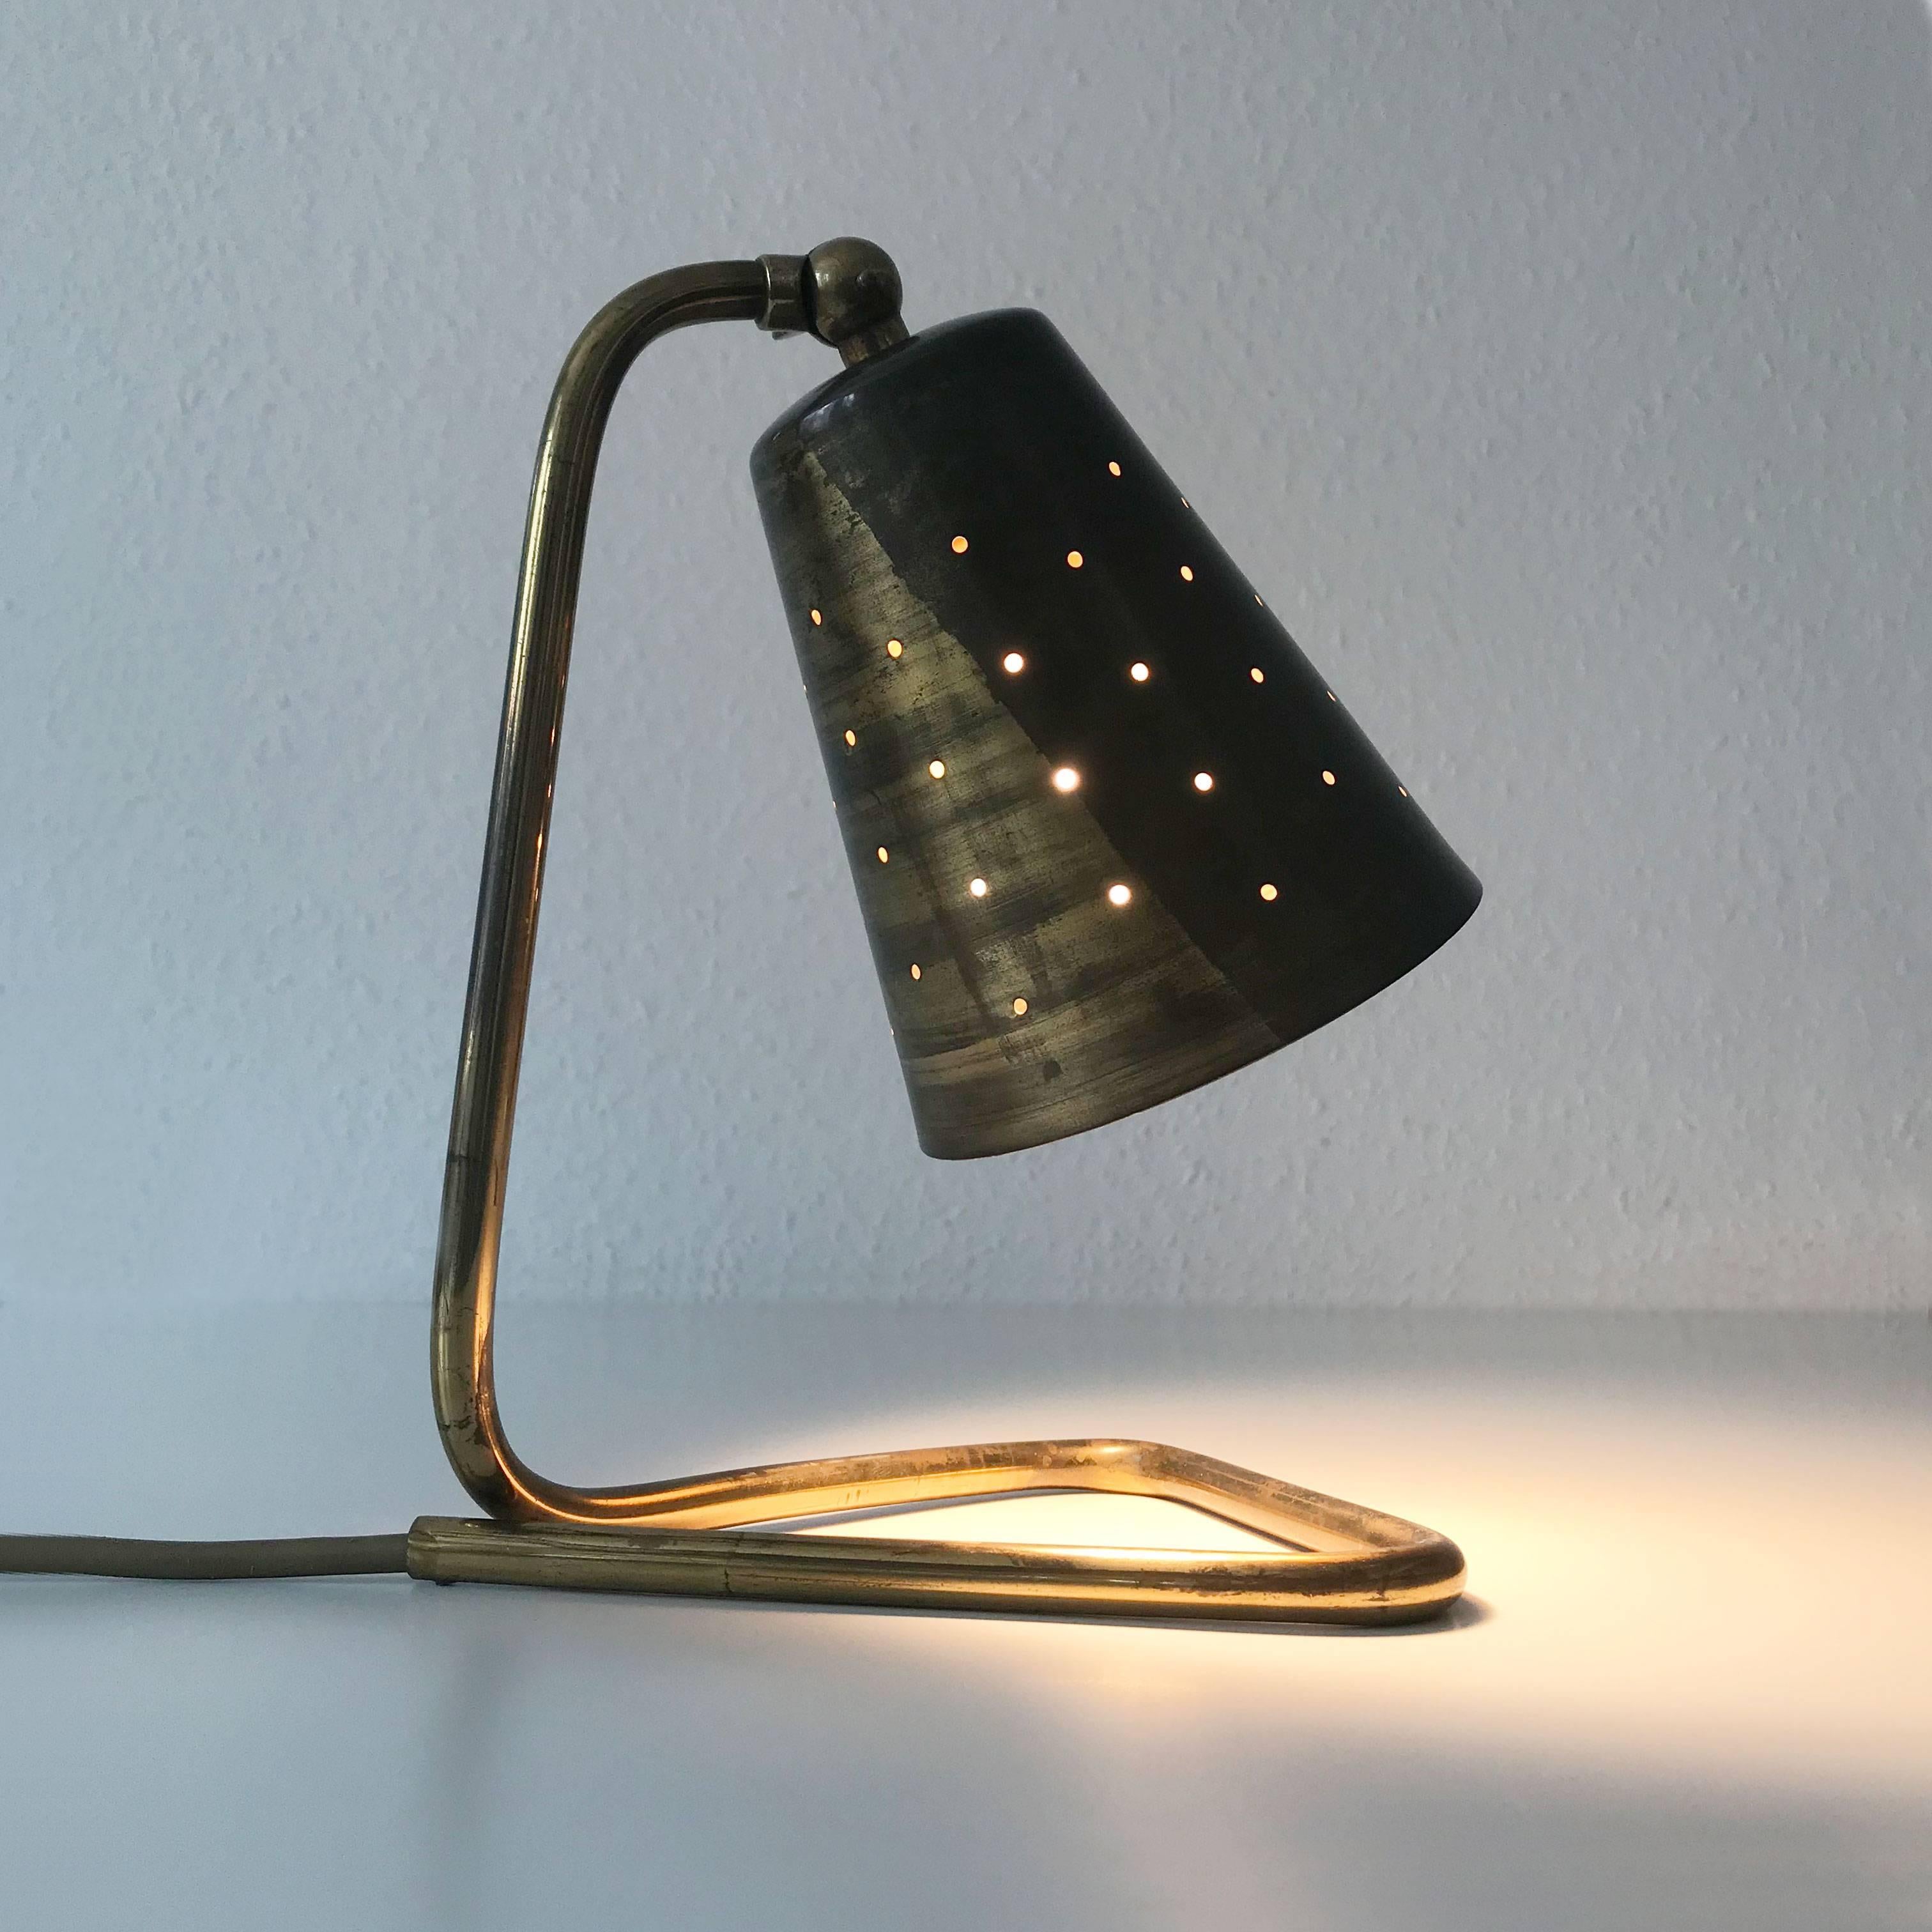 Stunning Mid-Century Modern Scandinavian table lamp with perforated diffuser. Probably designed by Hans Bergström, Sweden, 1950s.
Executed in brass tube and sheet, it gives a wonderful light effect due to perforated and adjustable diffuser. It